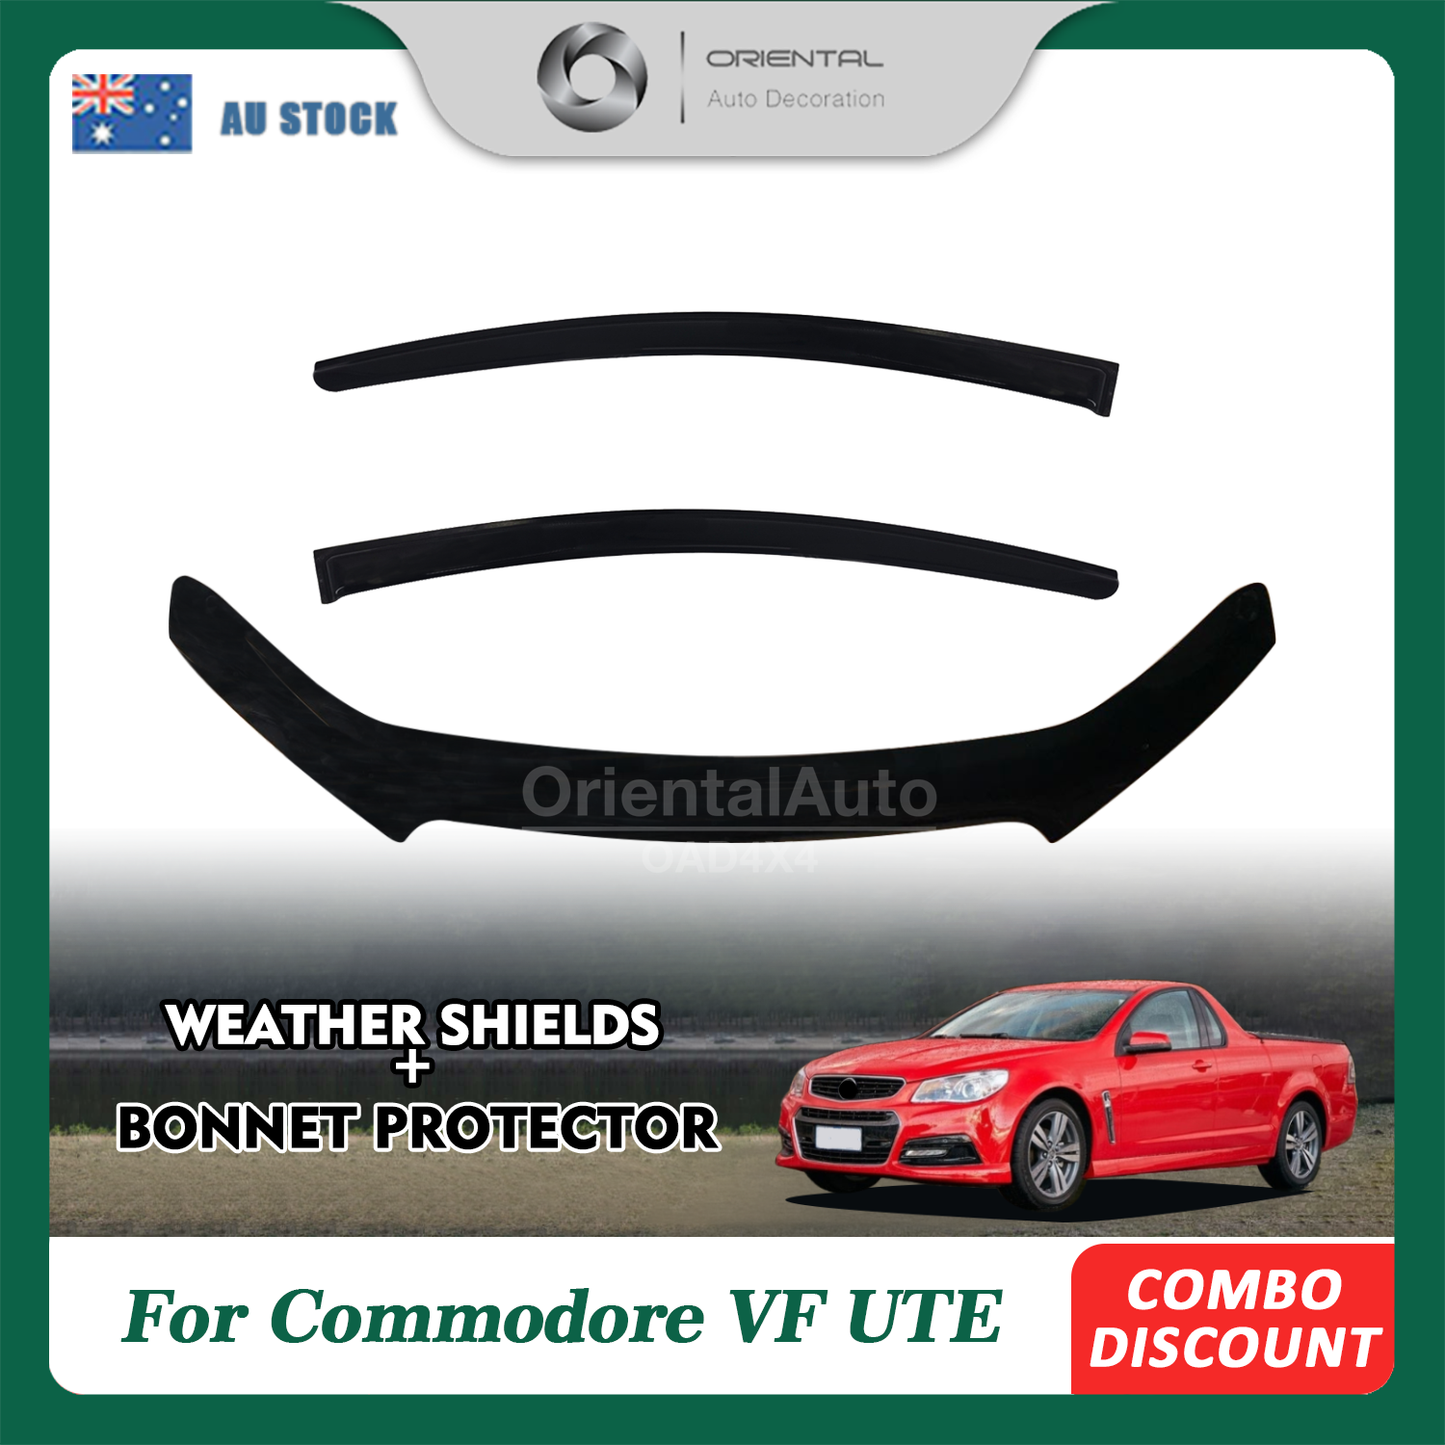 Bonnet Protector & Luxury Weathershields Weather Shields Window Visor For Holden Commodore VF UTE 2013-2016